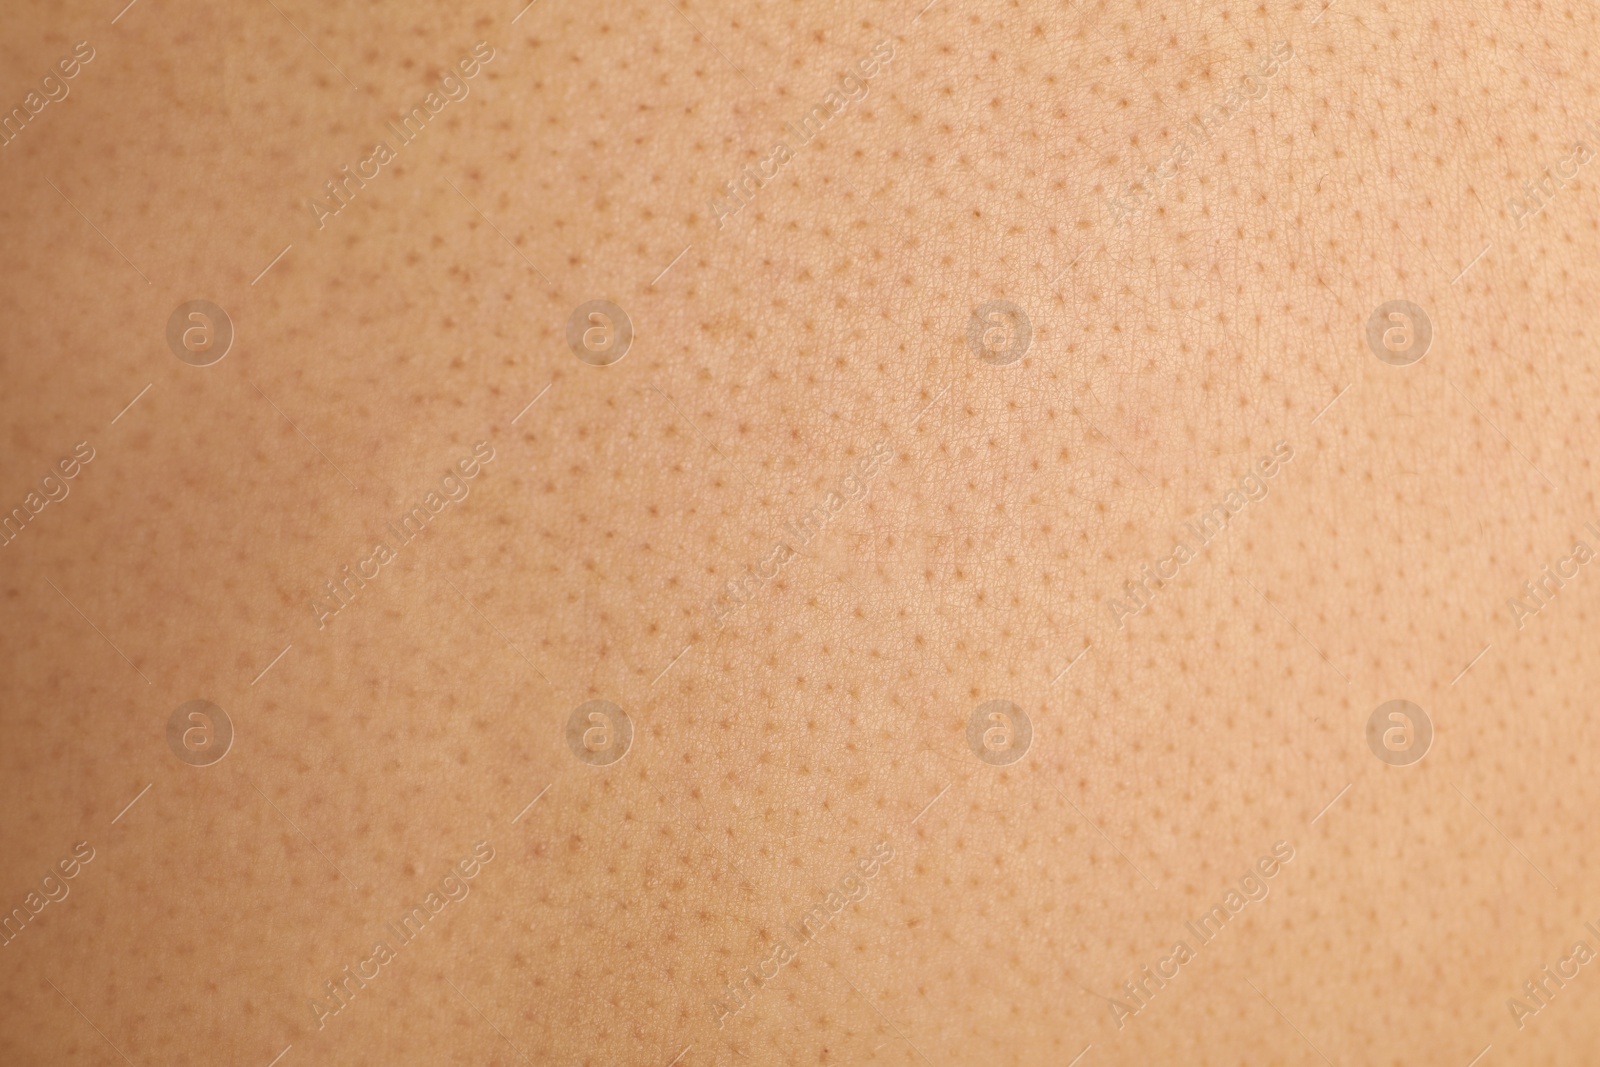 Photo of Texture of human skin with birthmarks, closeup view